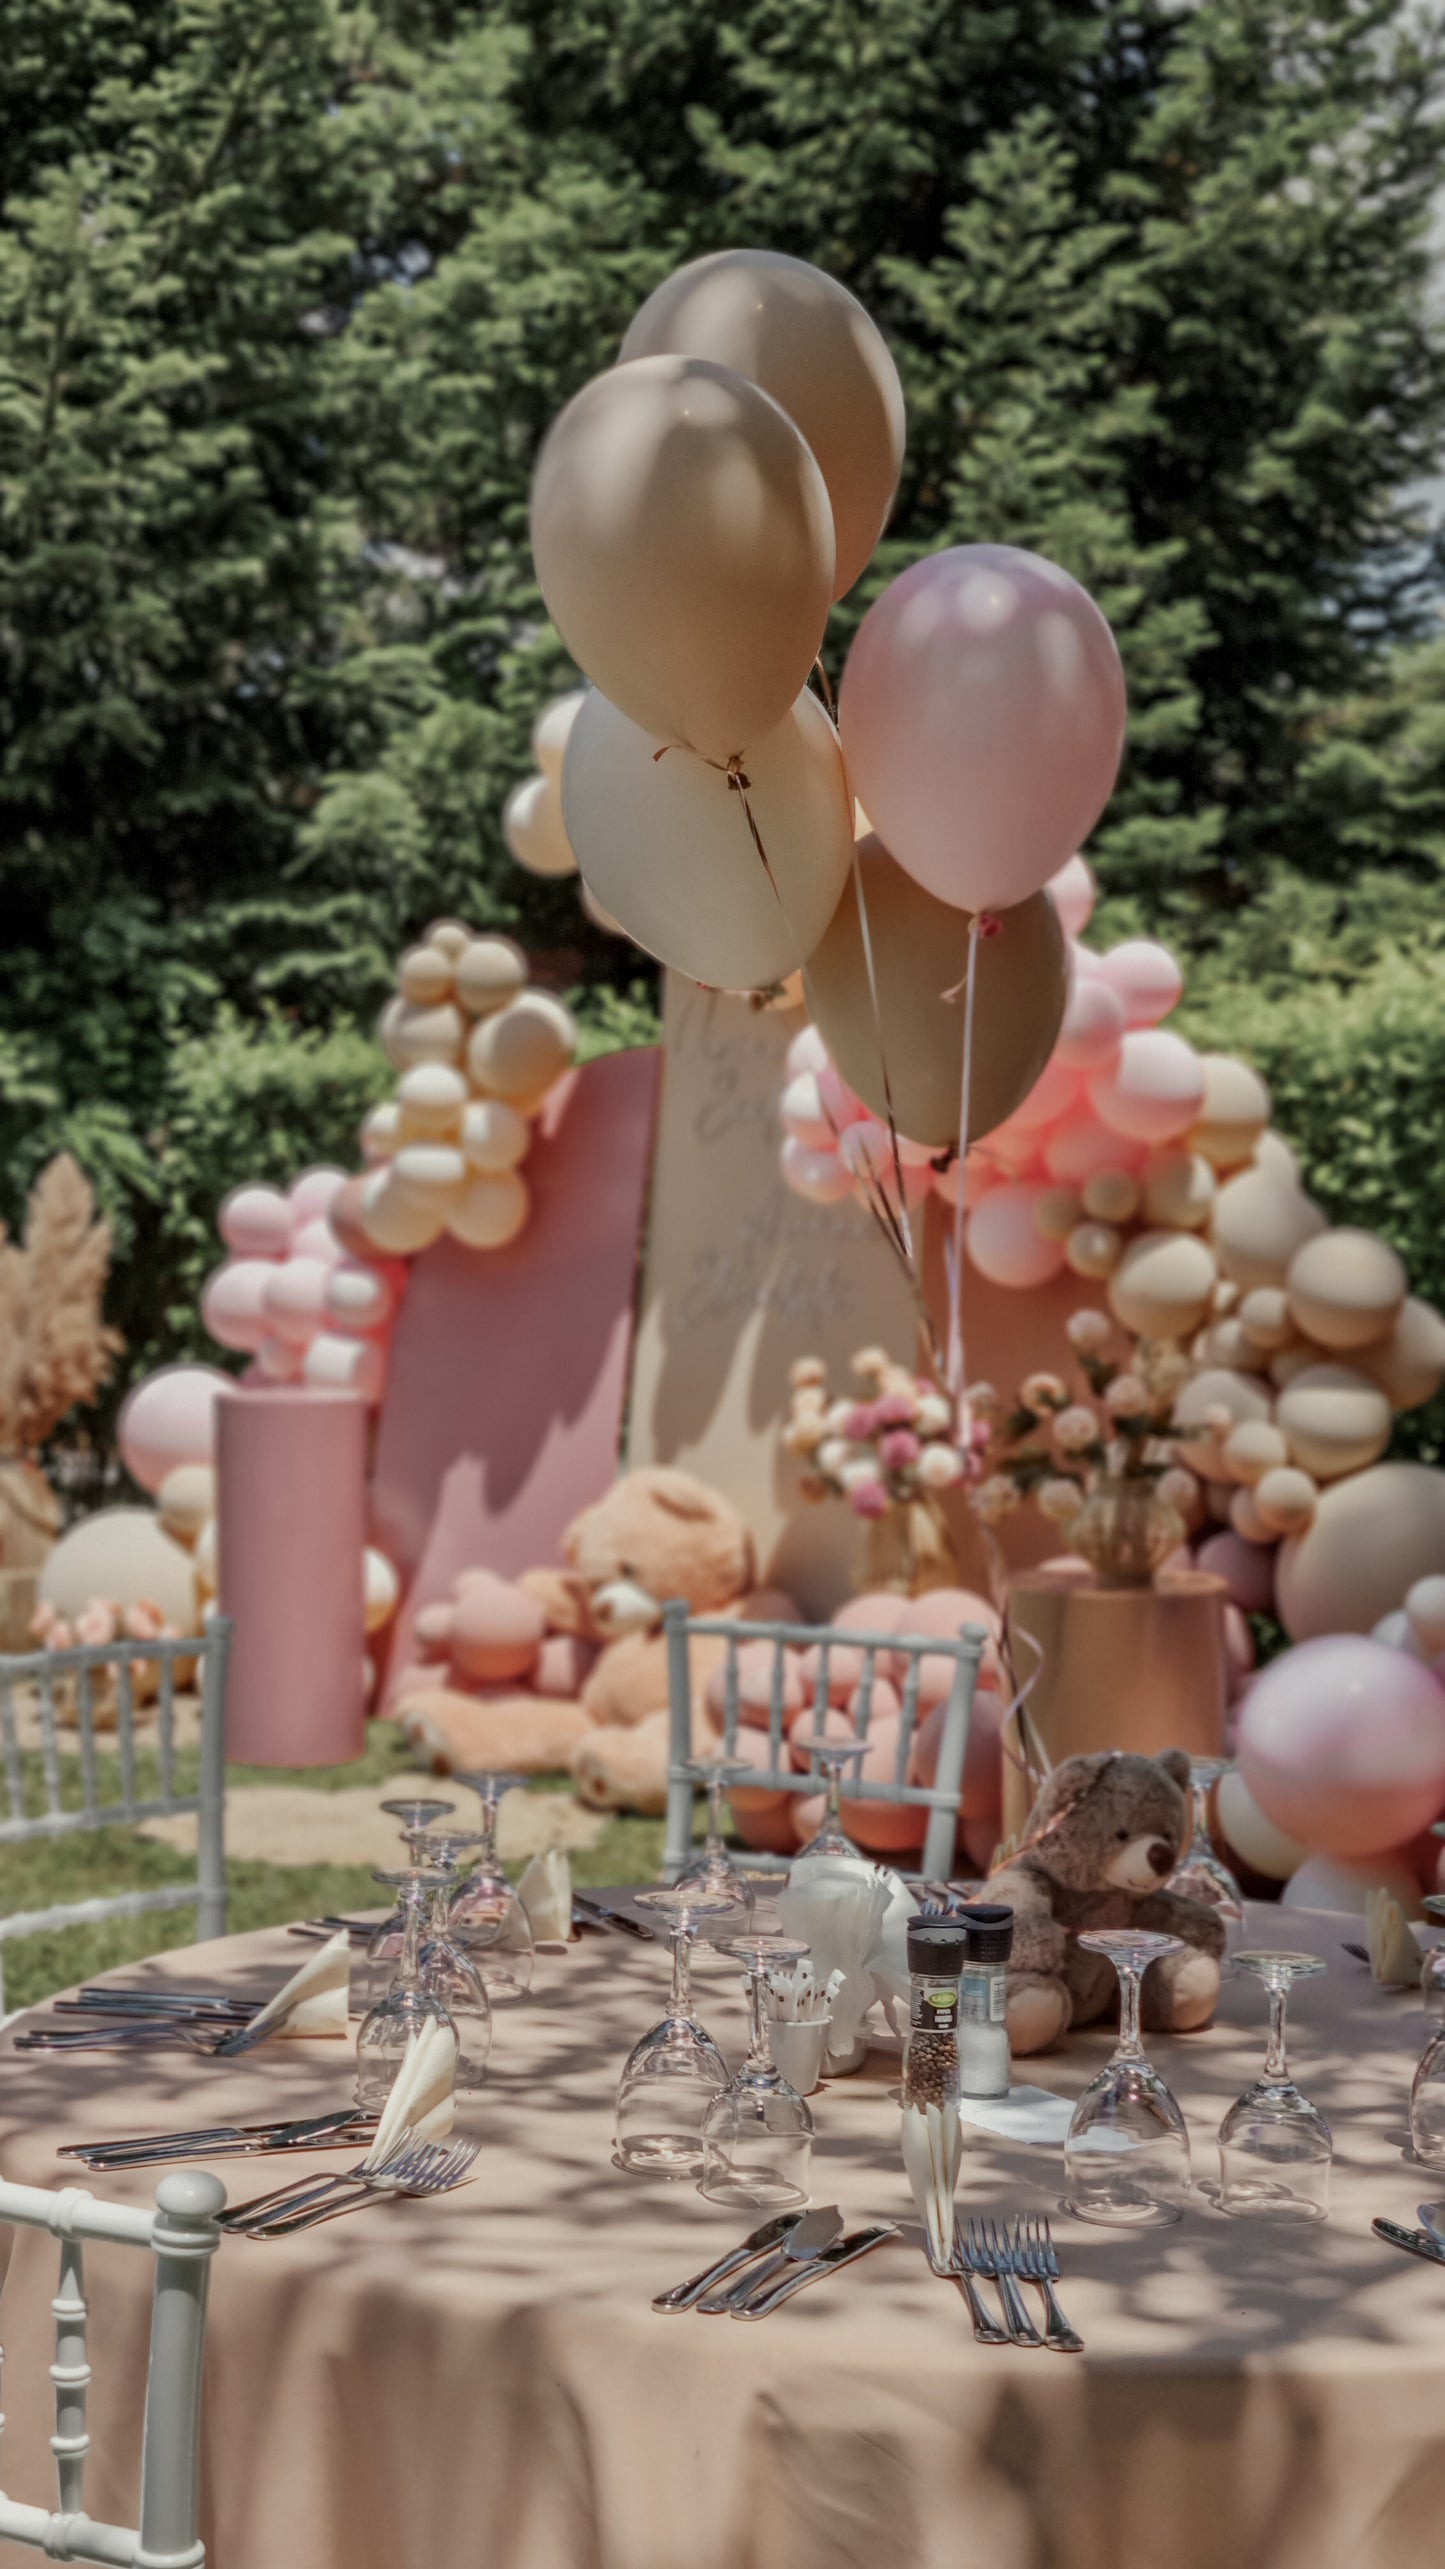 
                  
                    Balloons | Table arrangement | 5 helium balloons (with toy)
                  
                